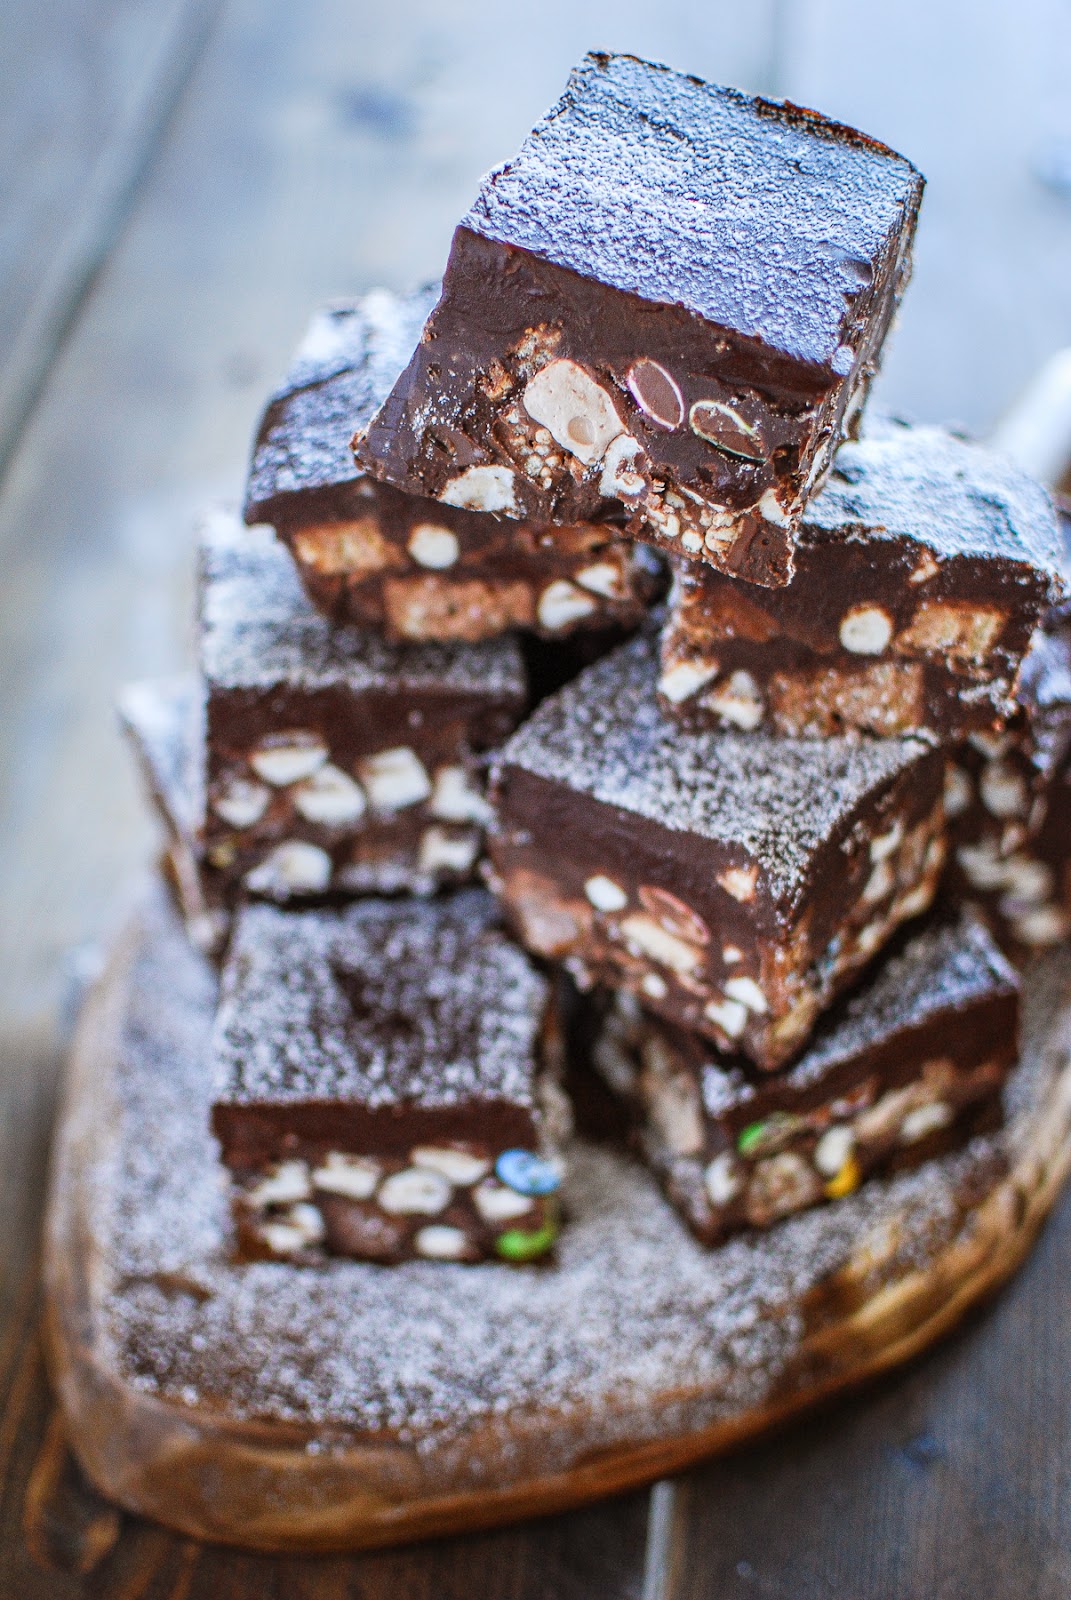 A delicious tiffin packed with all of your sweet shop favorites